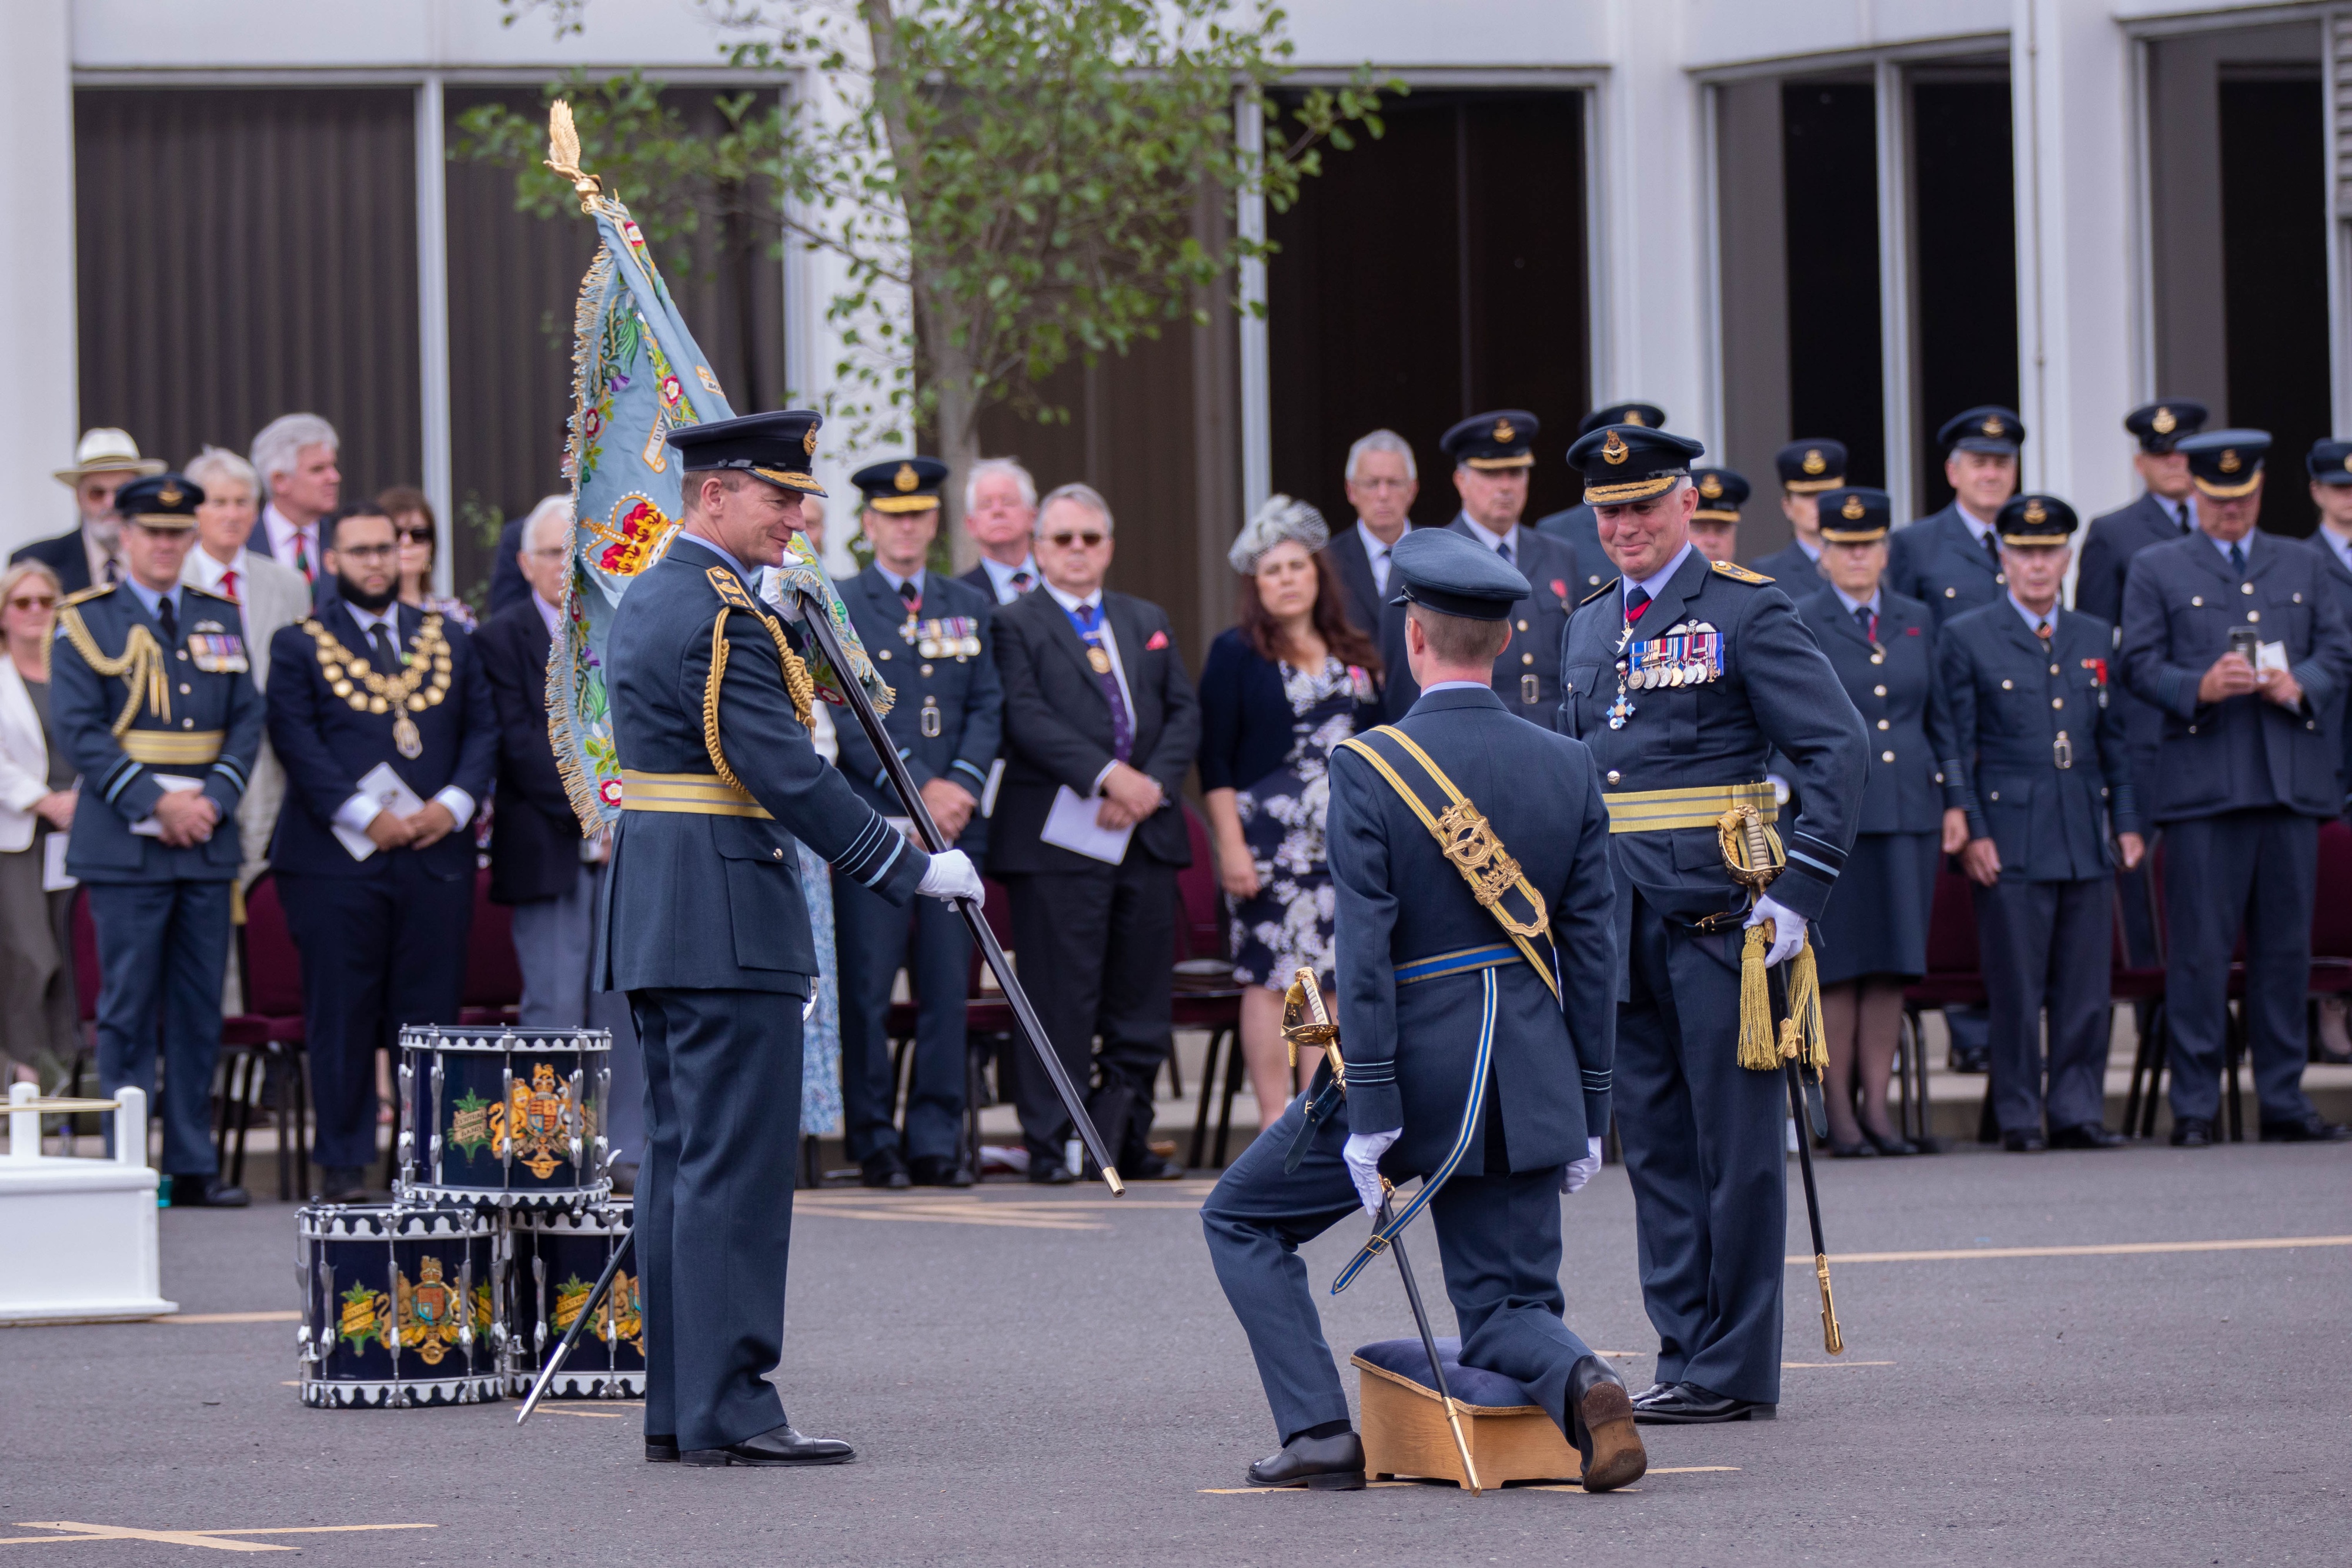 Image shows aviators stood during service, as Chief of the Air Staff hands over Standard.